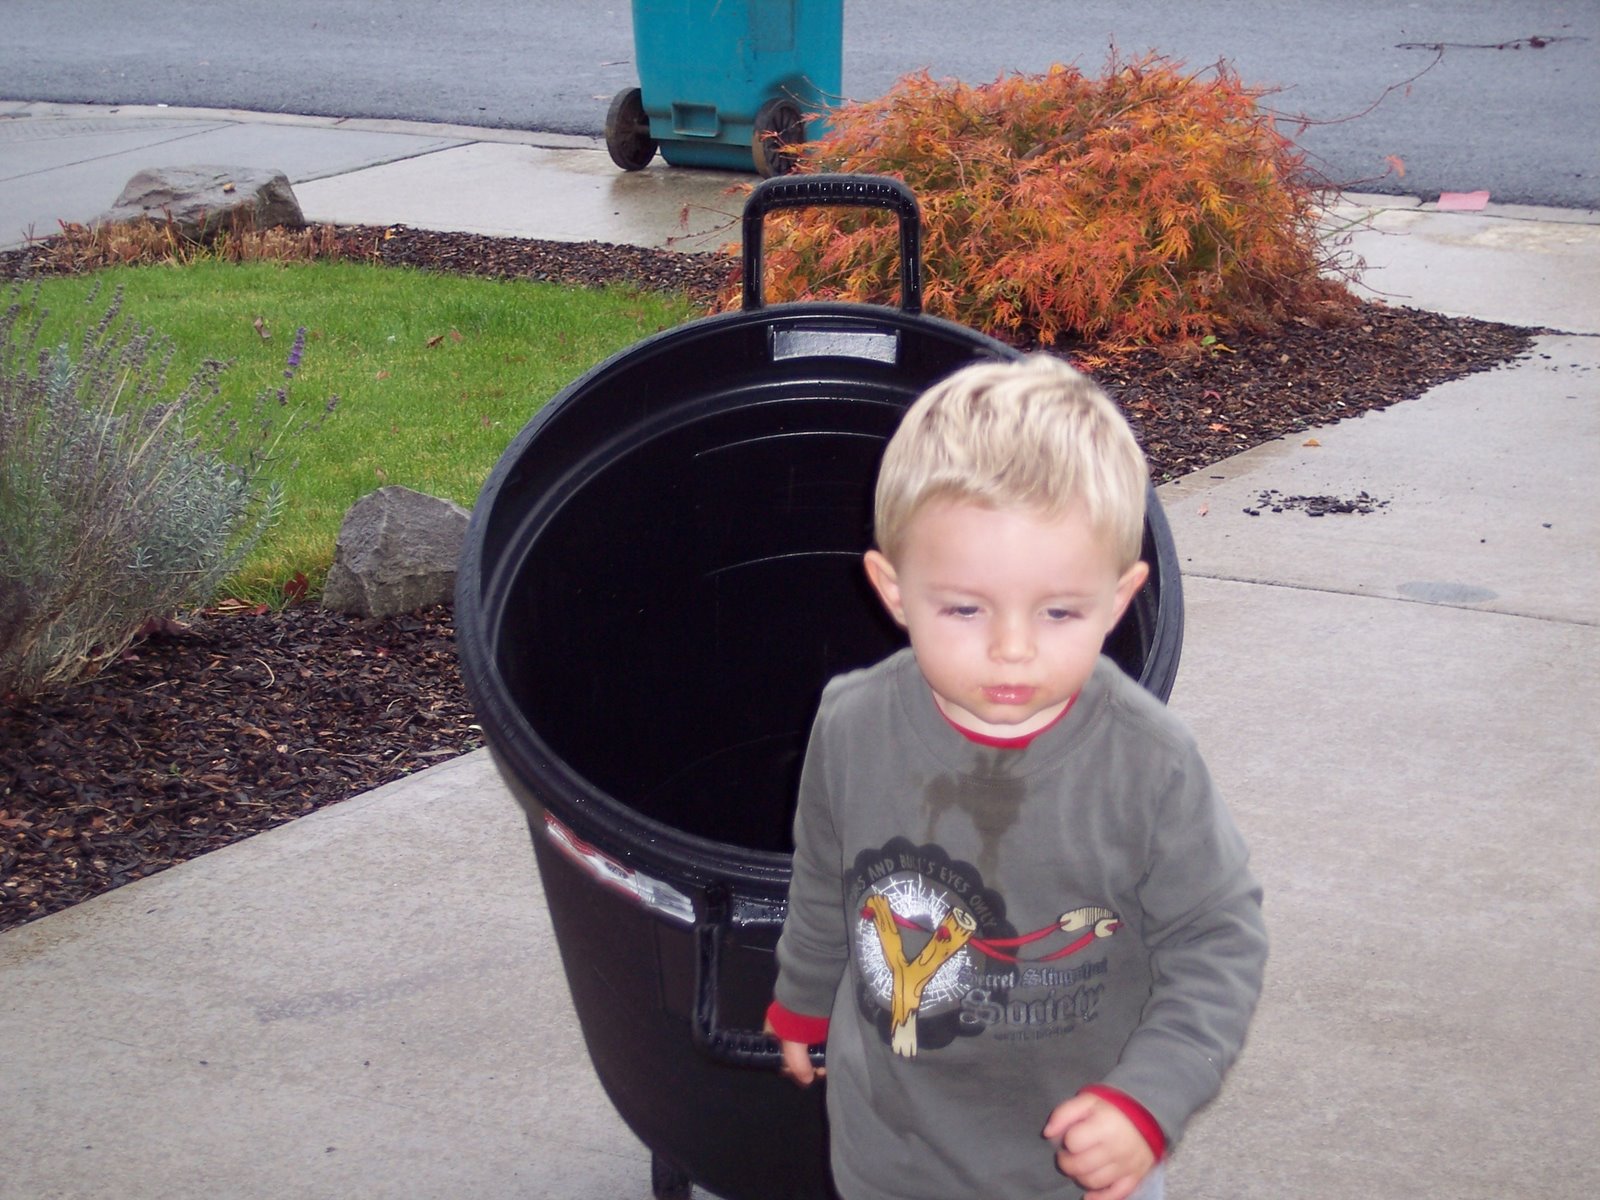 [Cooper+&+his+garbage+can+chores+005.jpg]